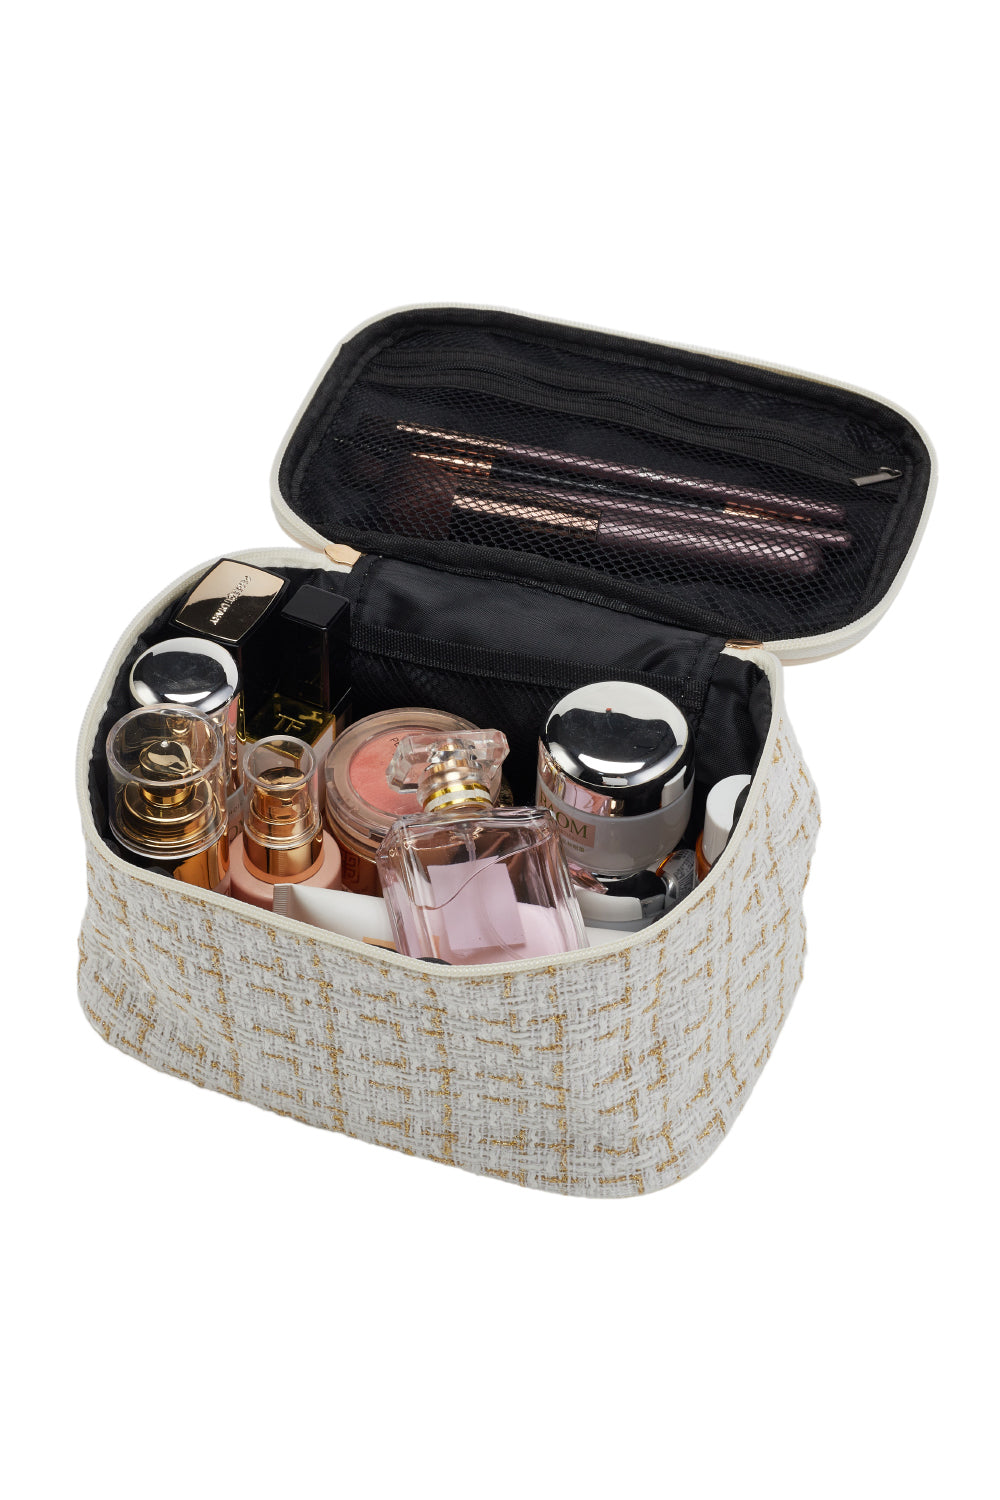 Luxurious Makeup Toiletry Storage Bag with Zipper